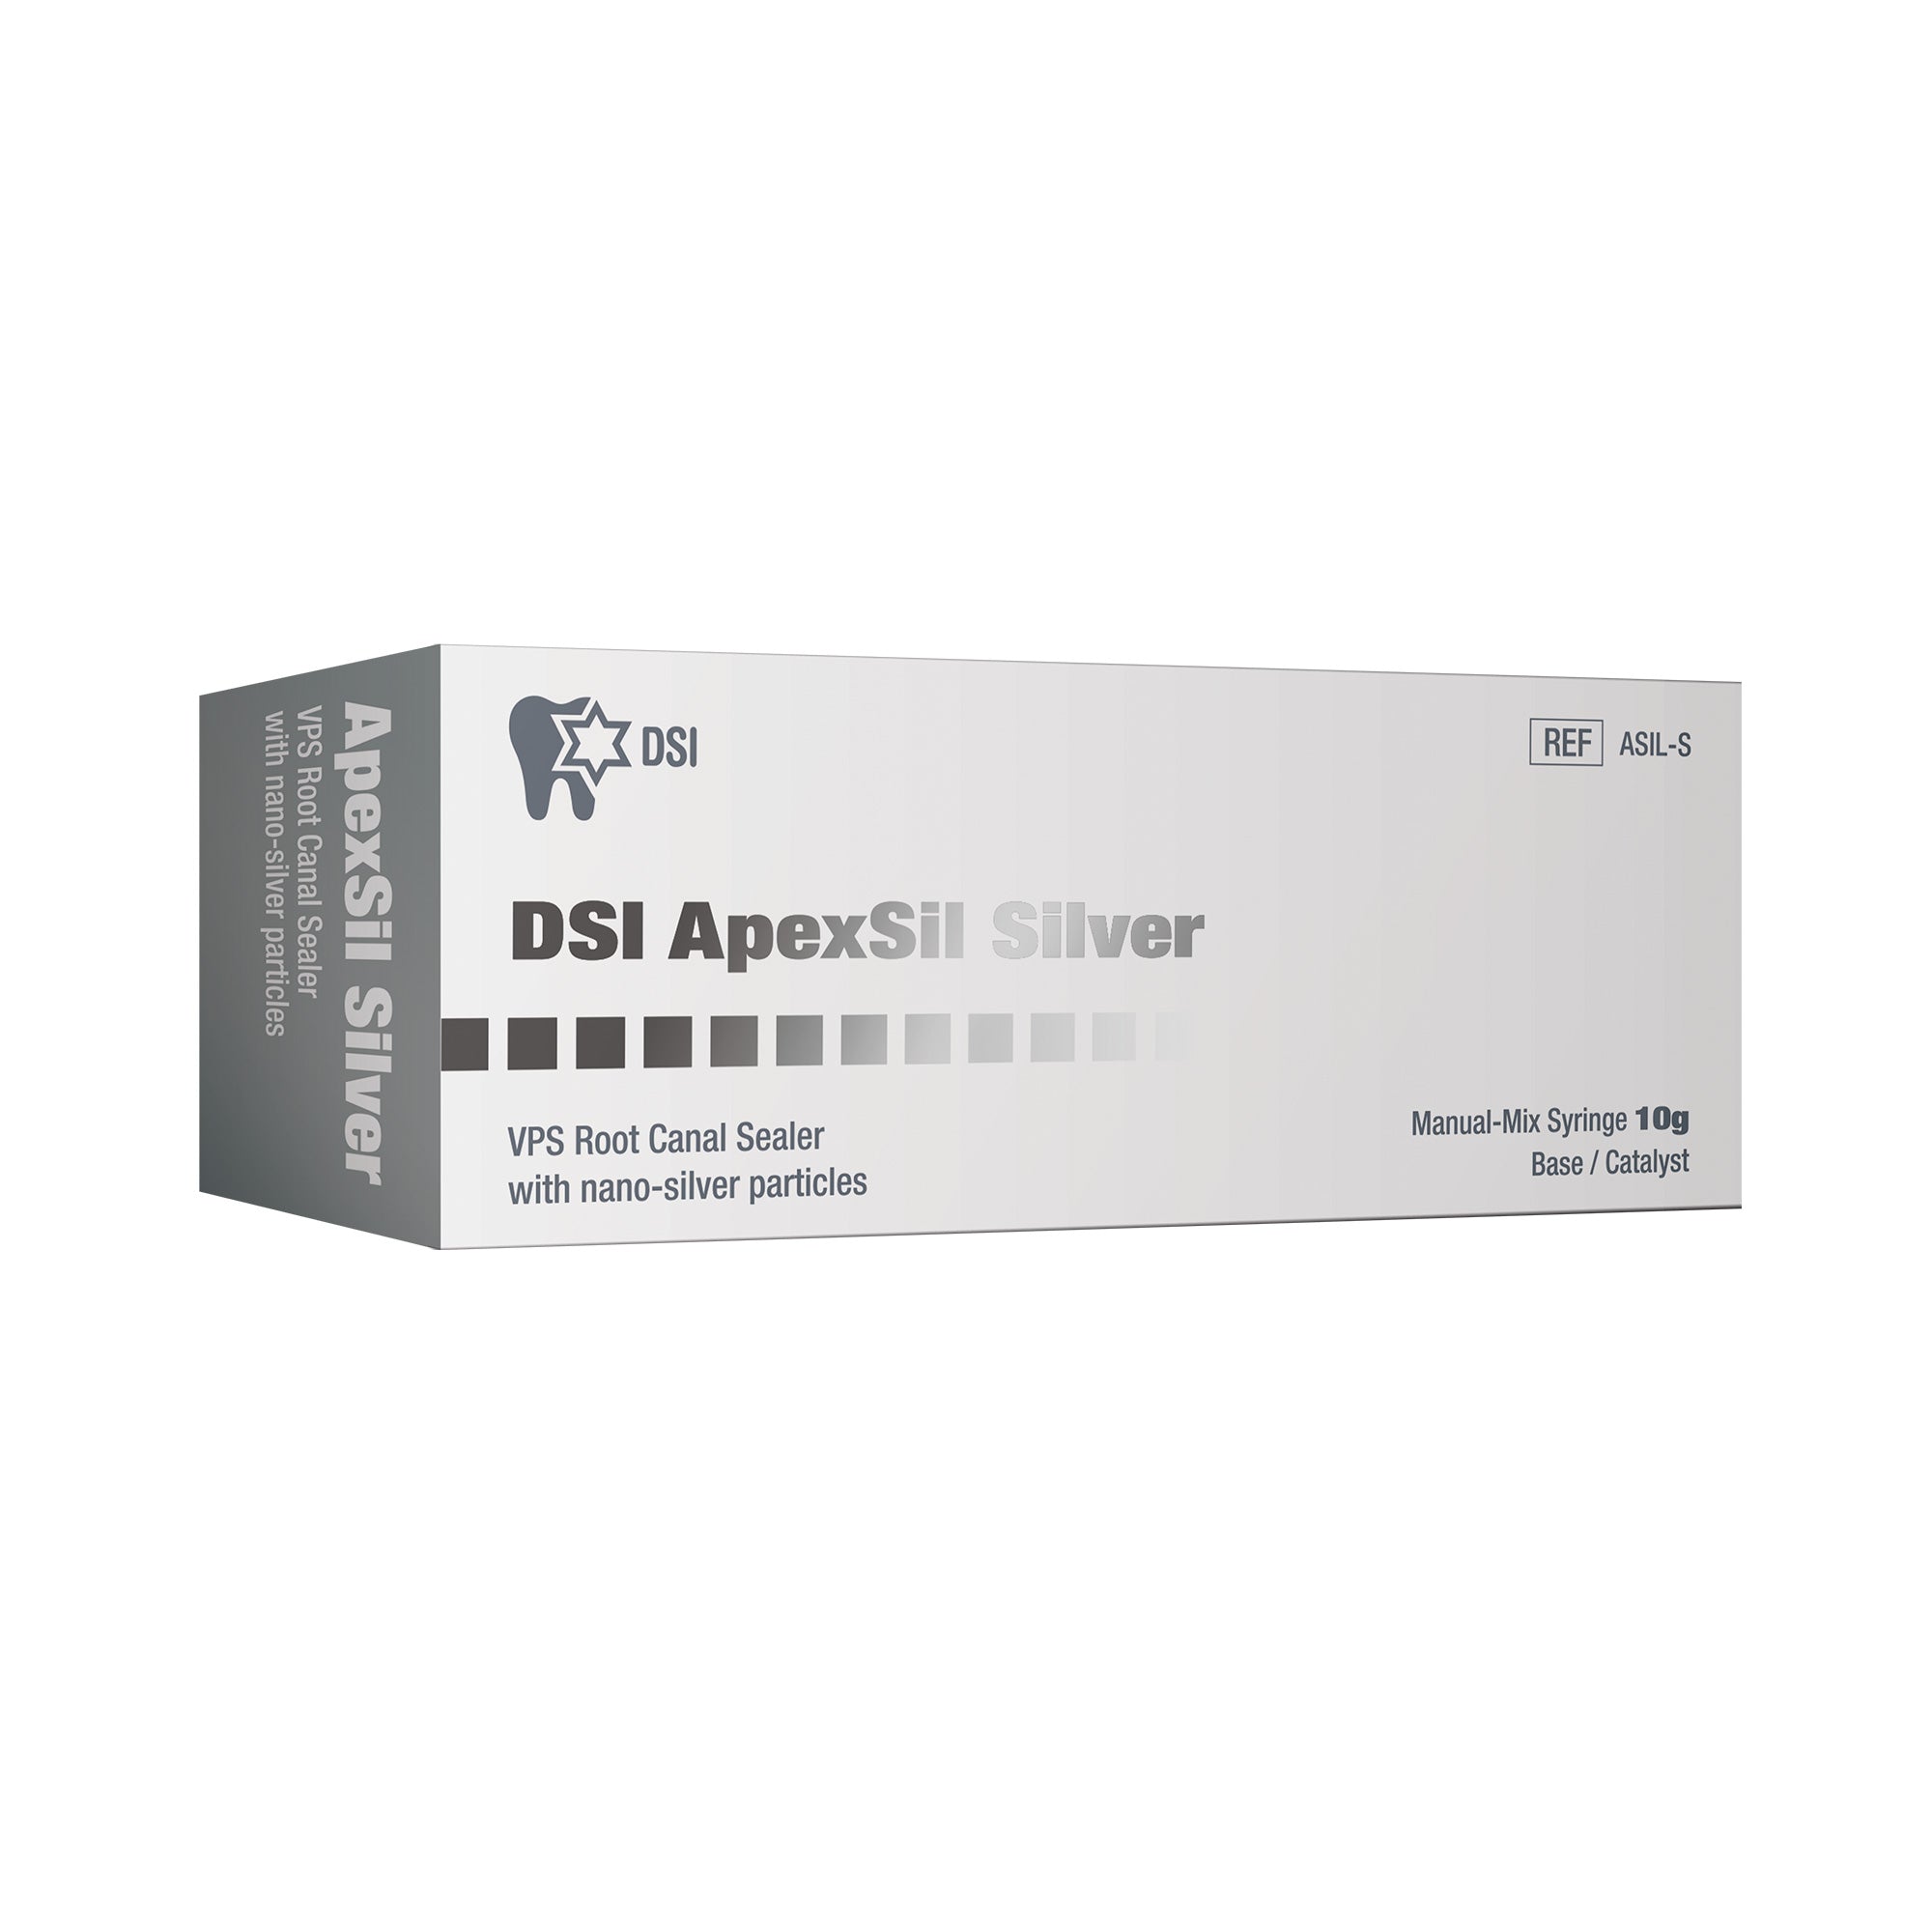 DSI Apexsil Silver Root Canal Sealer In Syringe 10g